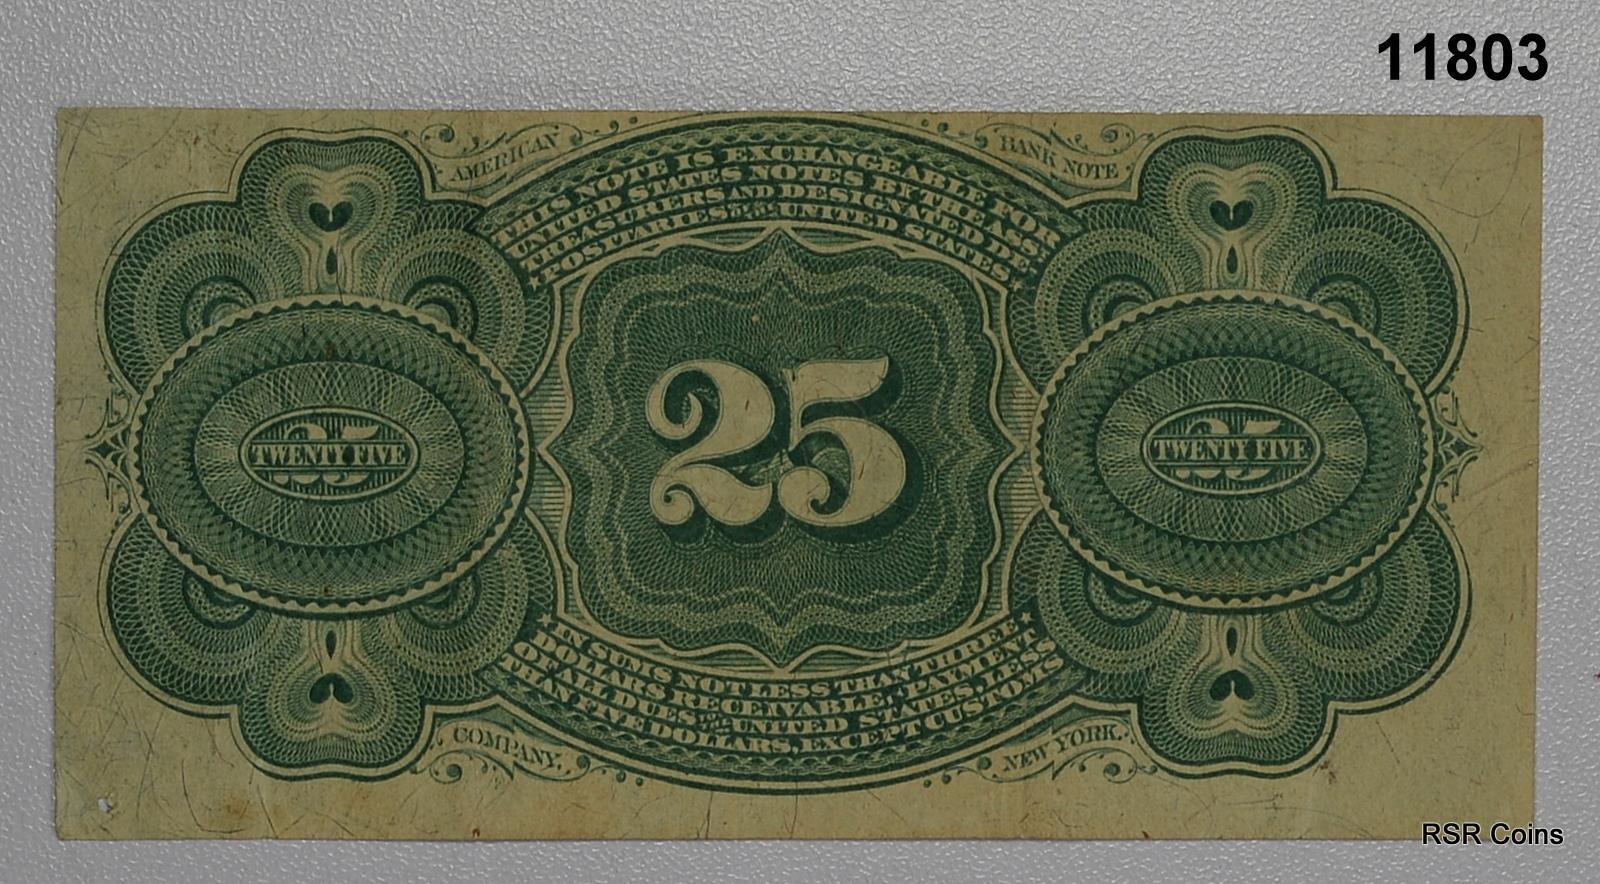 1863 US FRACTIONAL CURRENCY 25 CENTS GEORGE WASHINGTON NOTE #11803